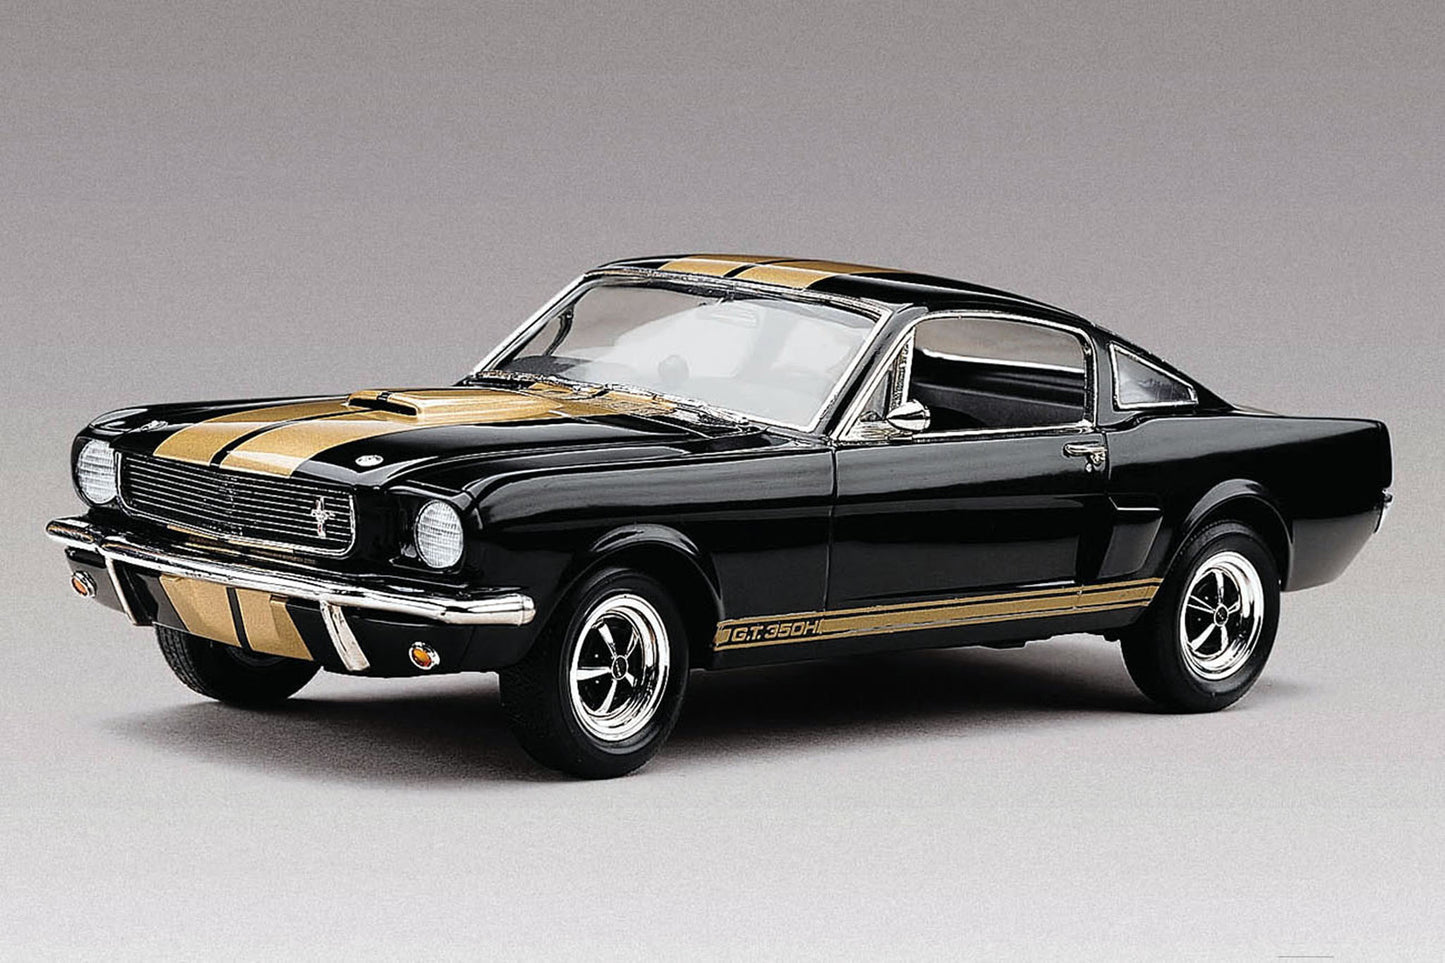 FORD SHELBY MUSTANG GT350 66 ELEANOR